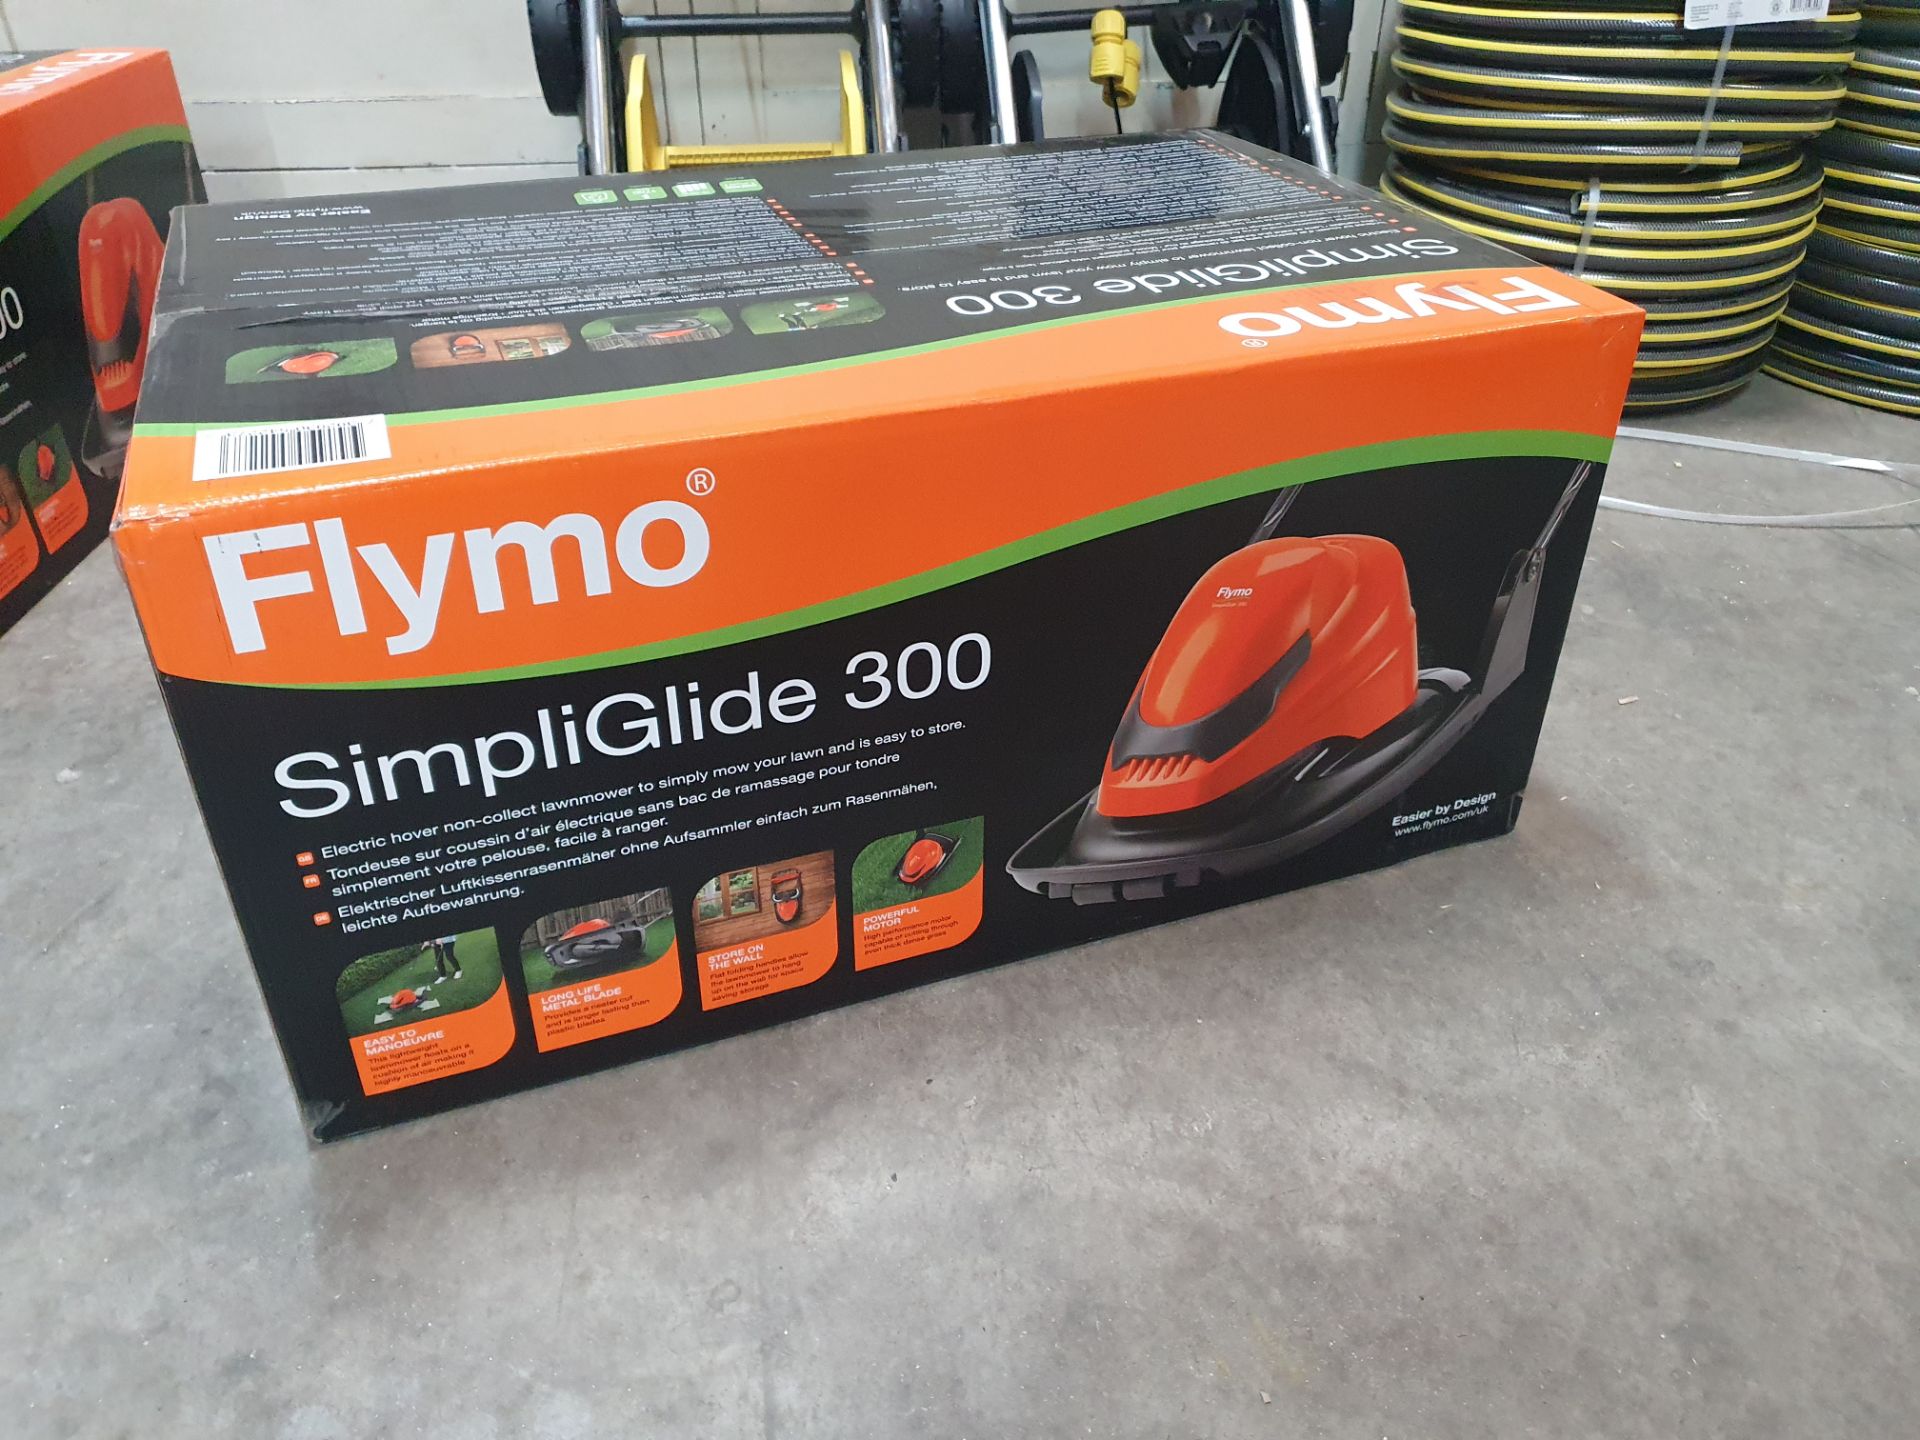 * Flymo SimpliGlide 300 electric hover non-collect lawnmower RRP £90